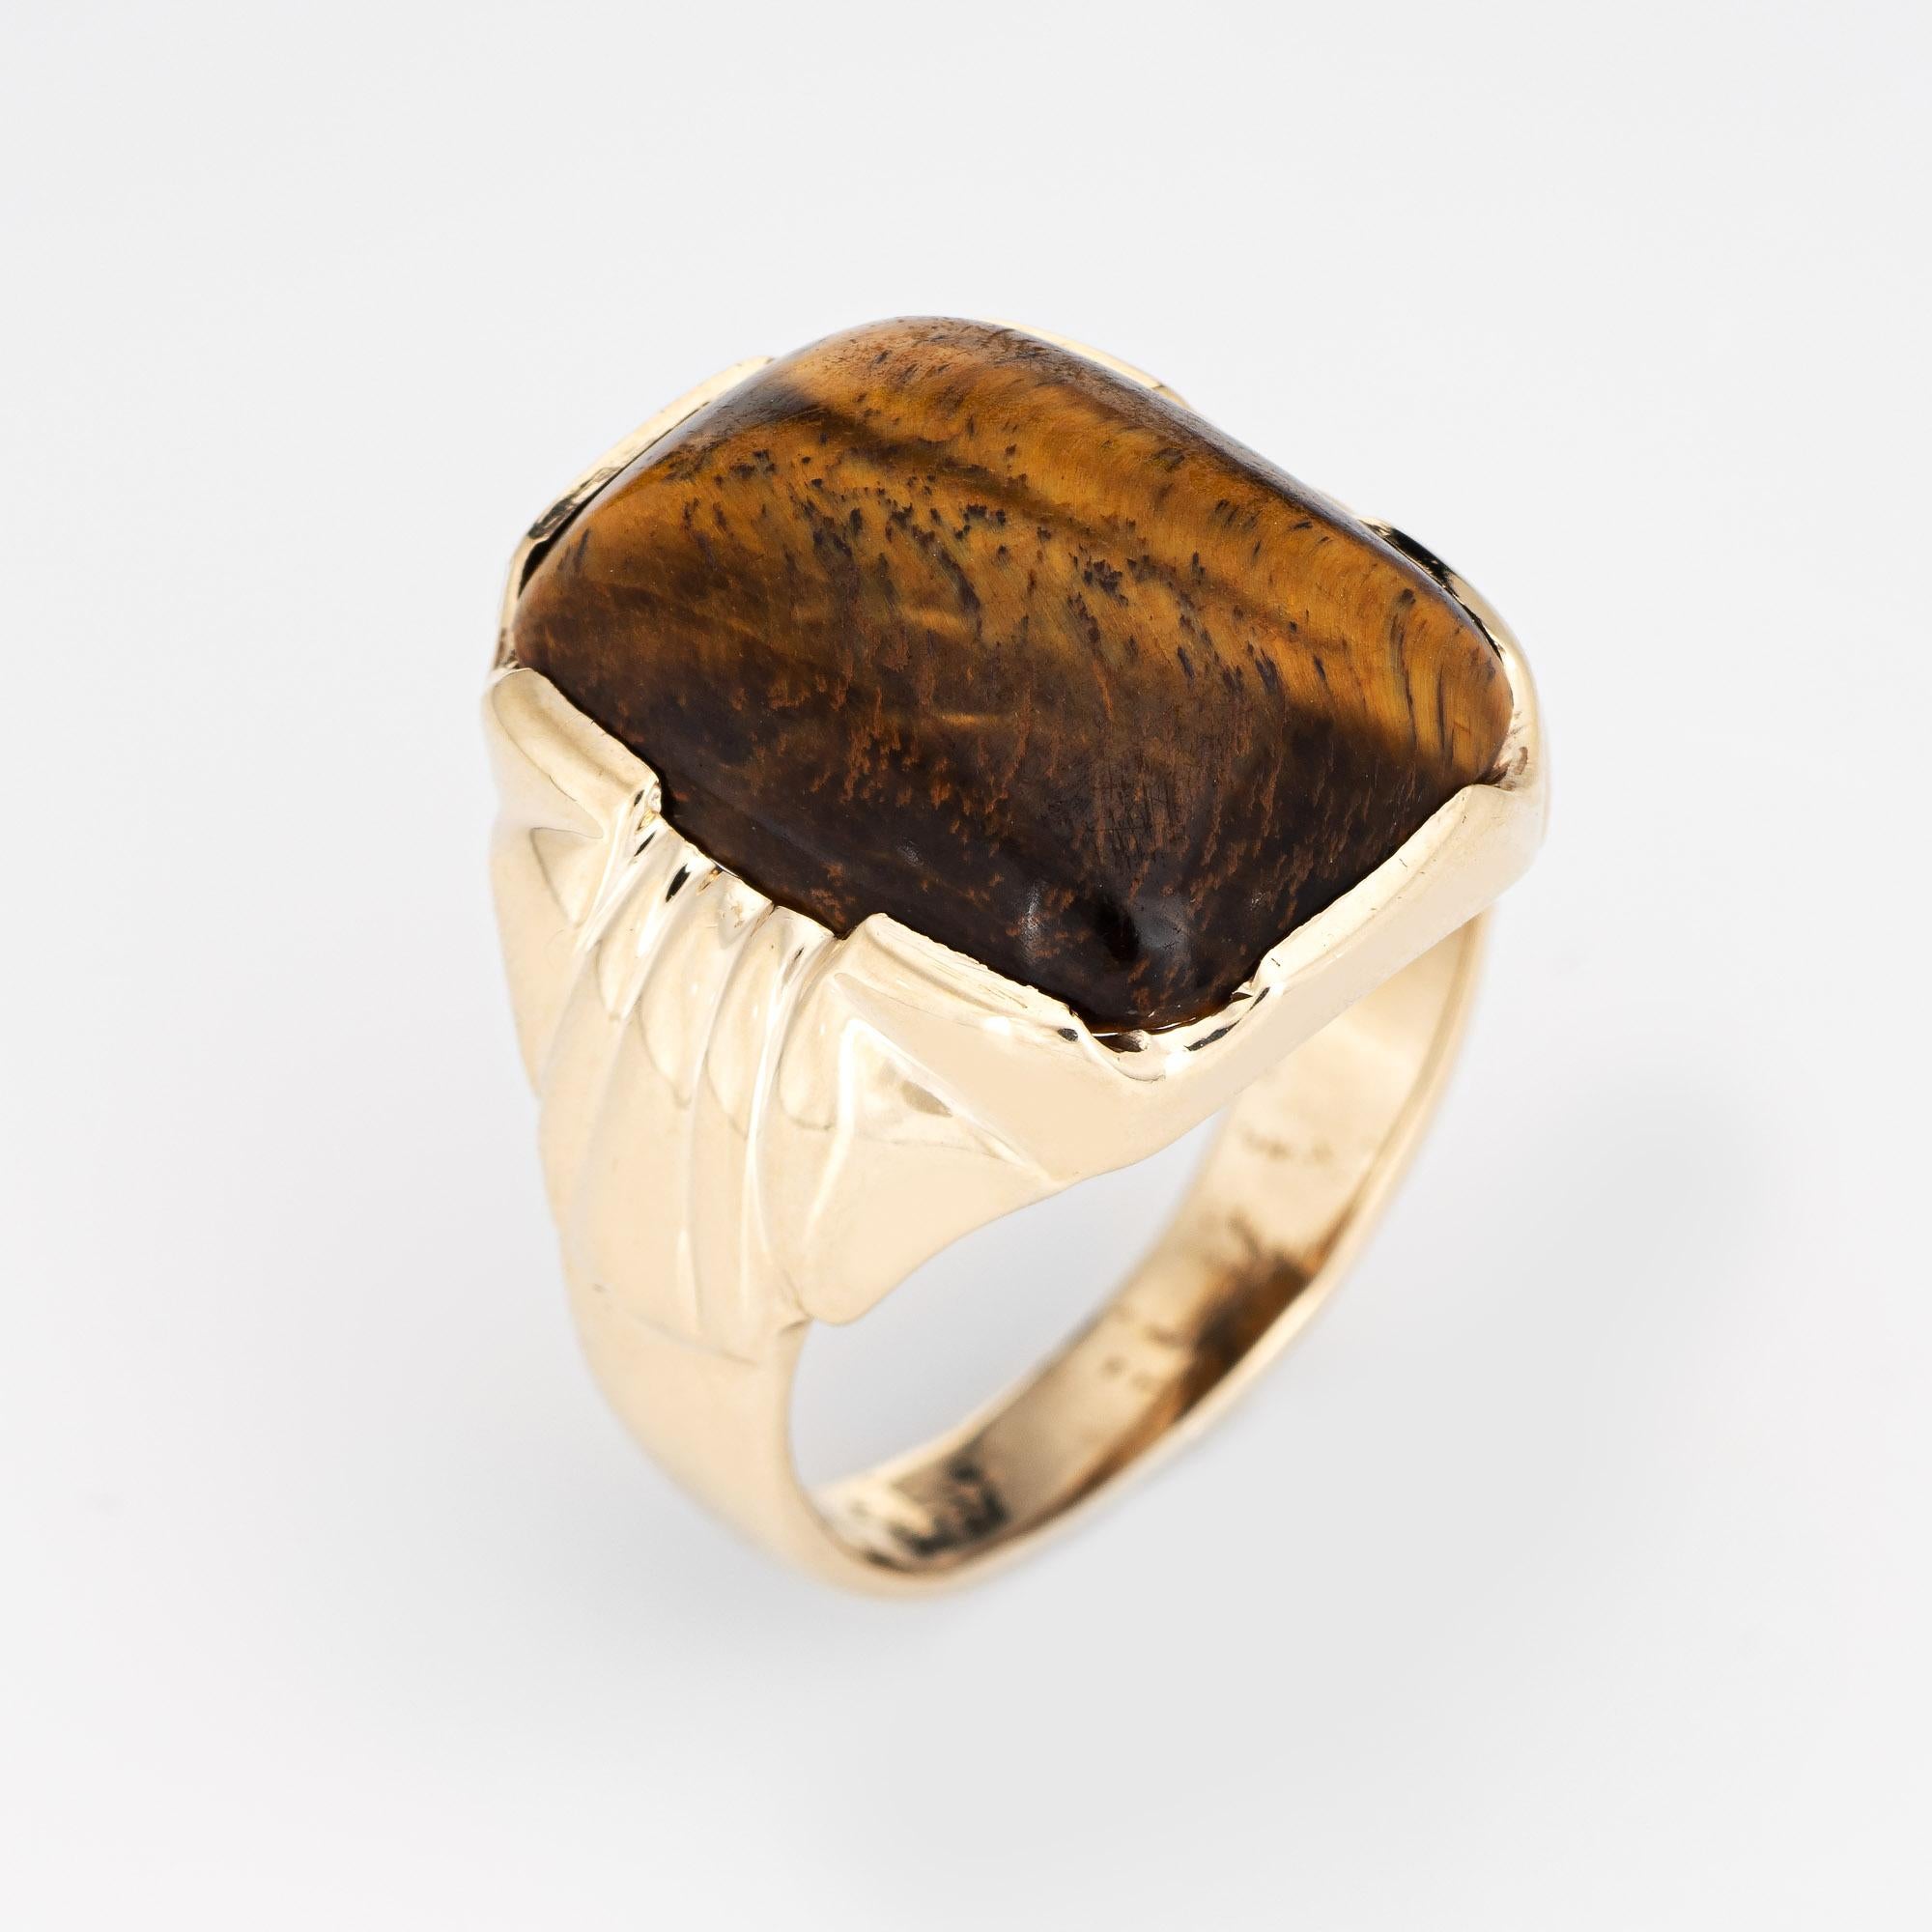 Stylish vintage men's tigers eye ring (circa 1970s) crafted in 10 karat yellow gold. 

Cabochon cut tigers eye measures 20mm x 15mm. The stone is in very good condition and free of cracks or chips. 

The luminous tigers eye shows golden flashes with